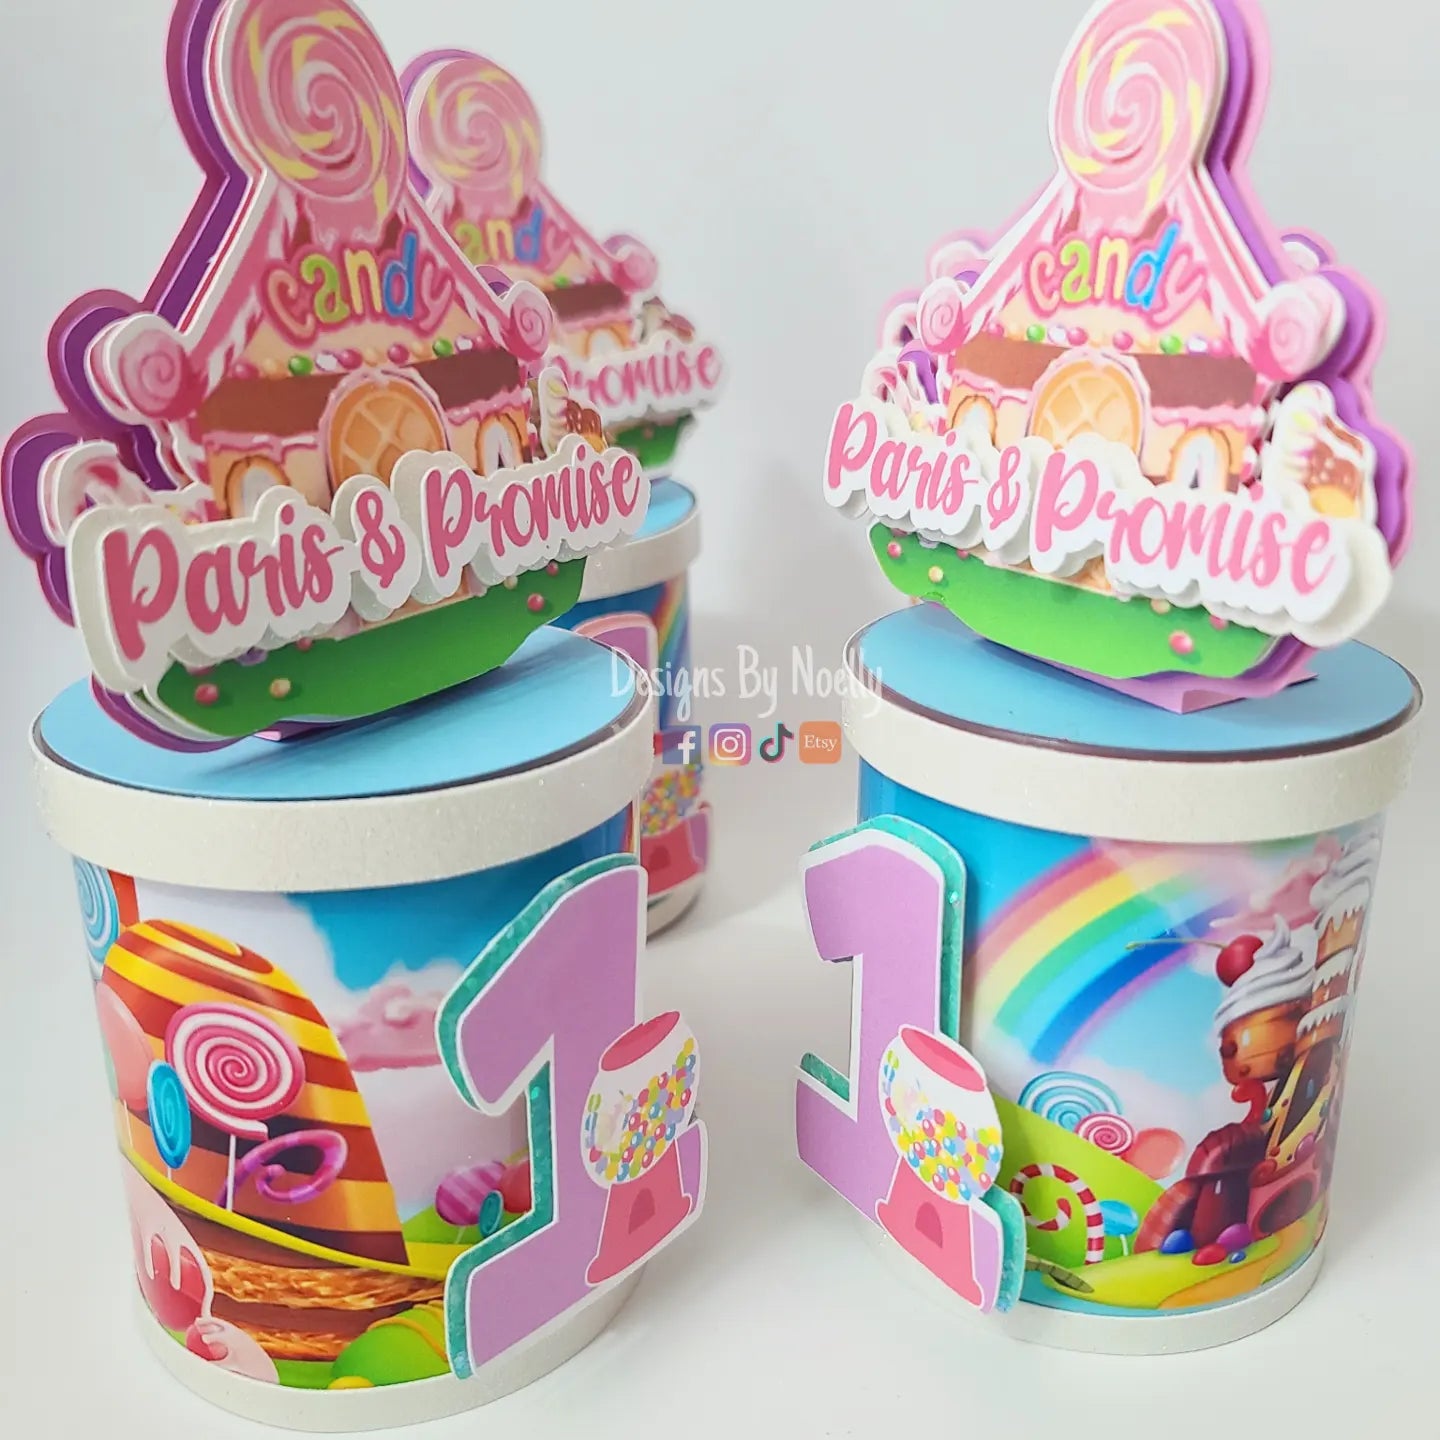 Candy Land Party Favors